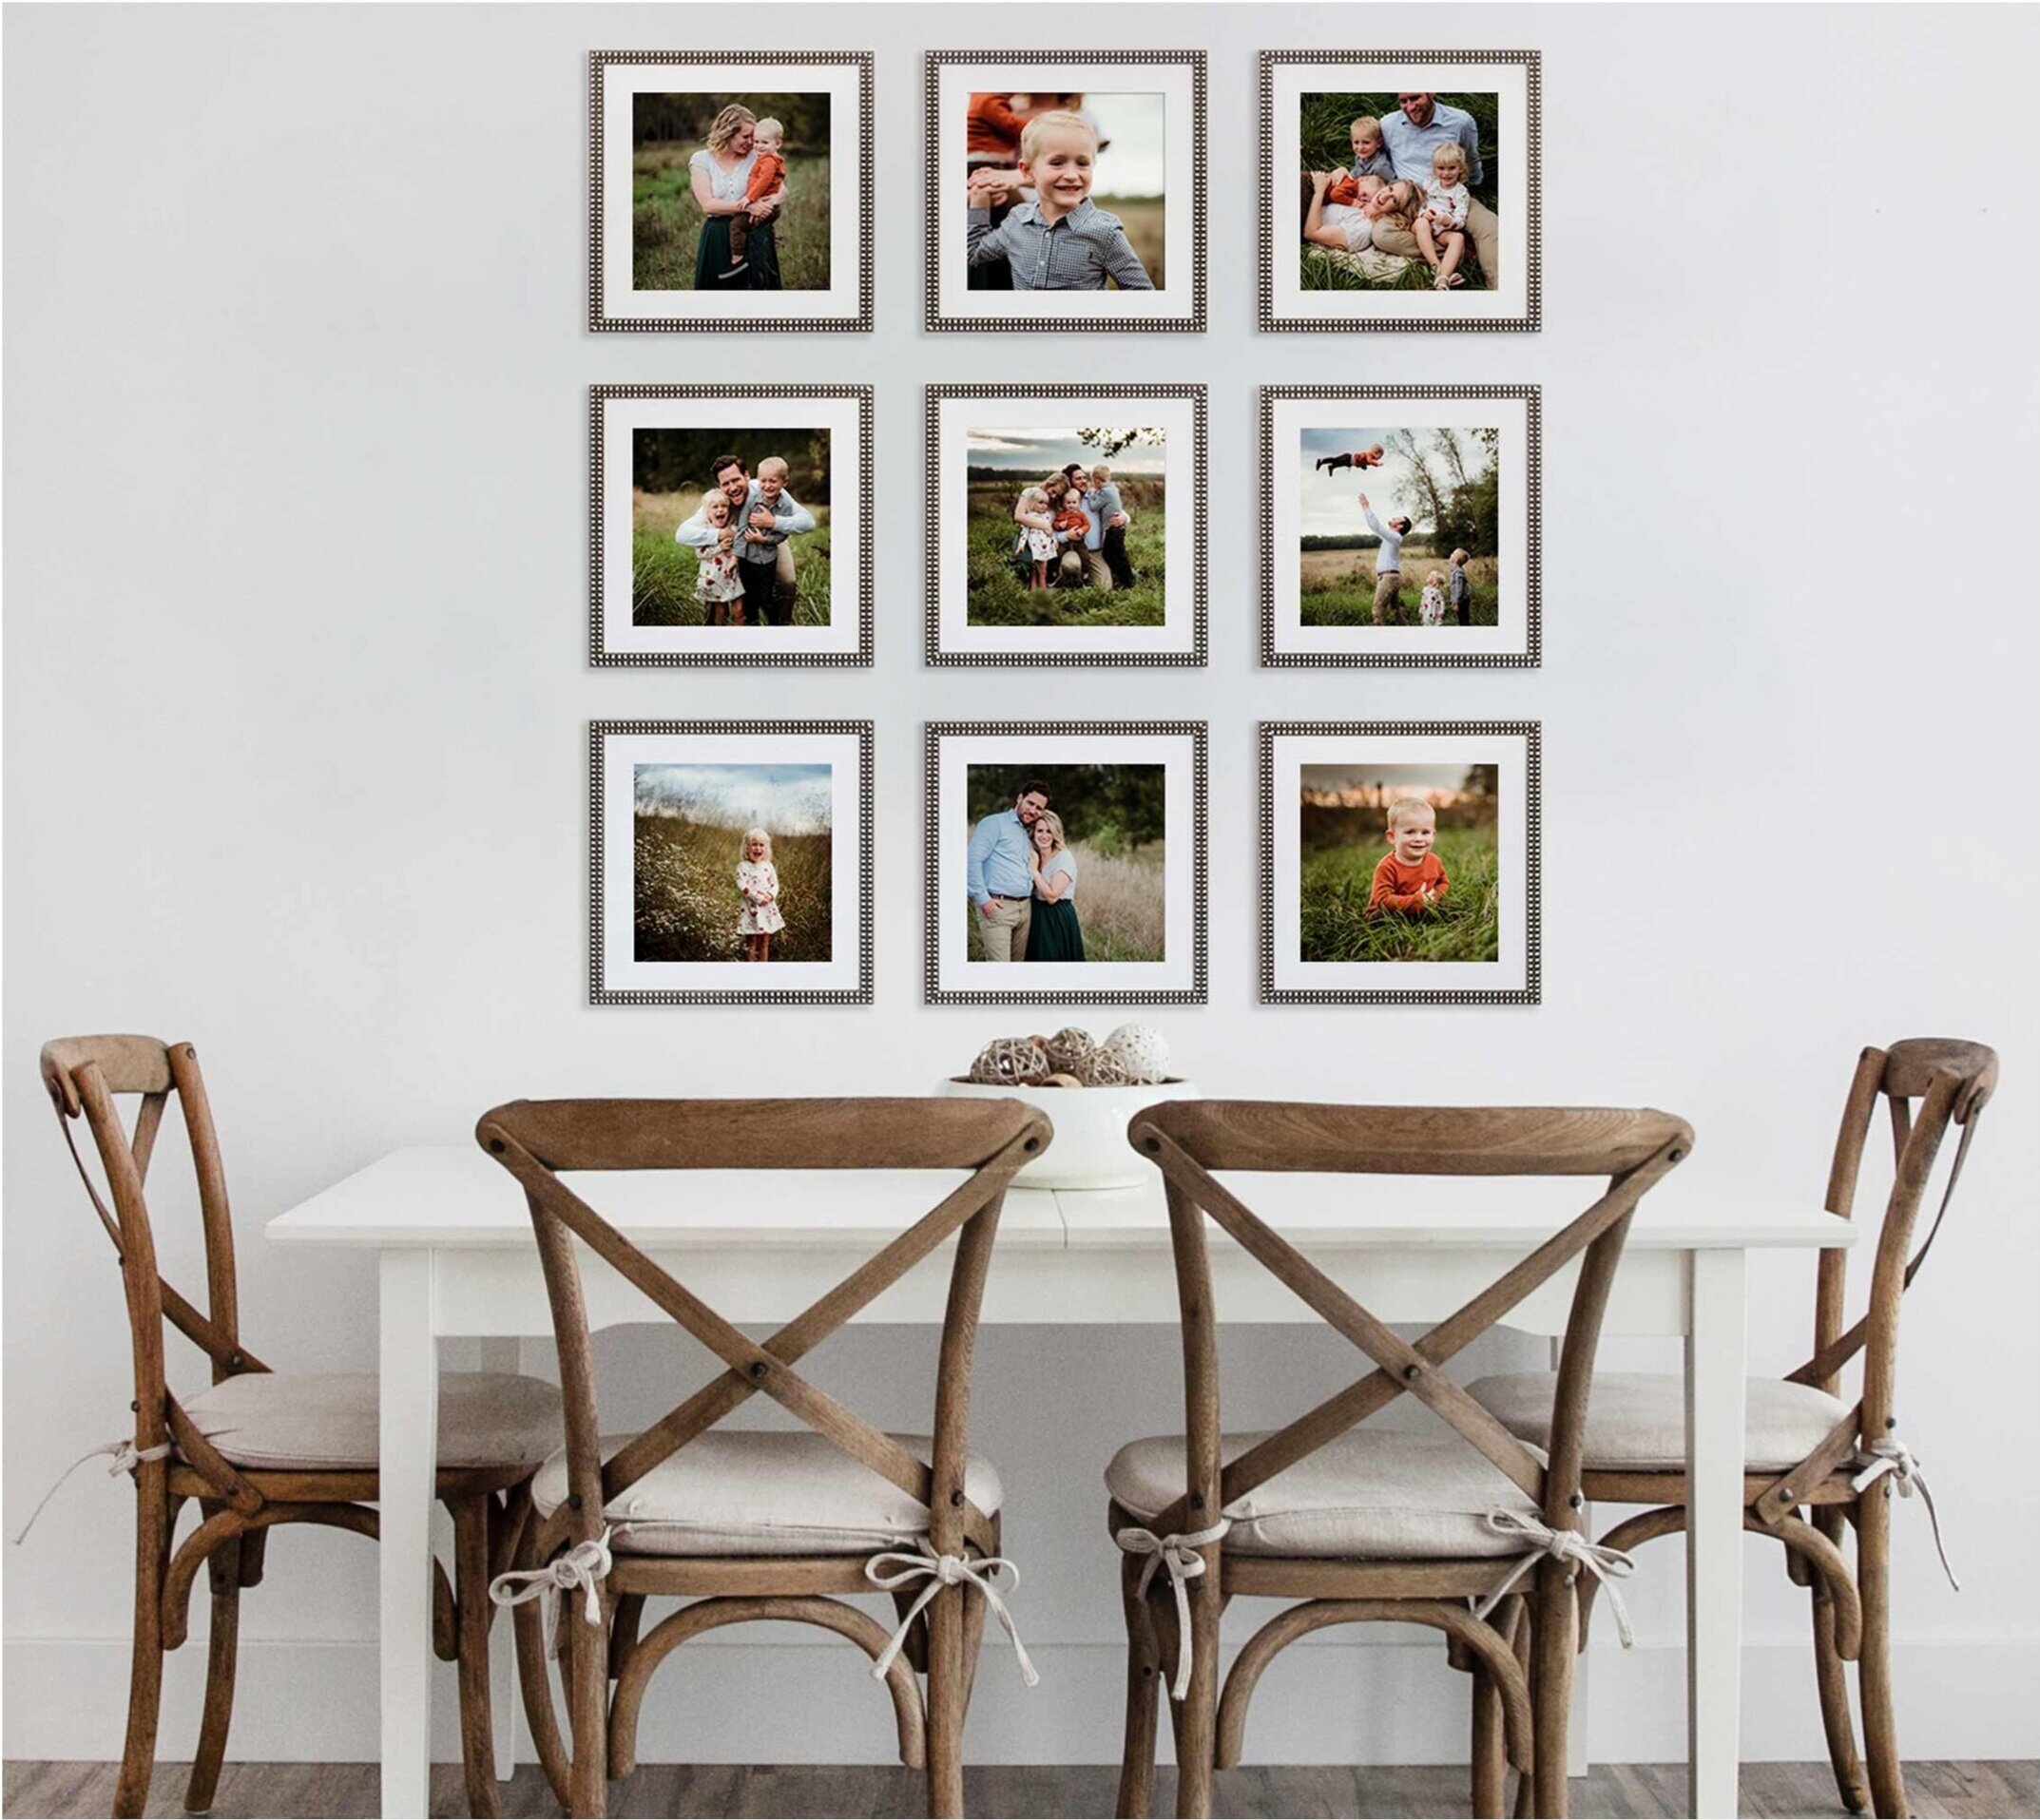 A grid is a great way to display family photos on your walls. Here is an example of 9 square photos displayed as a gallery wall in the dining room in Lafayette, Indiana.